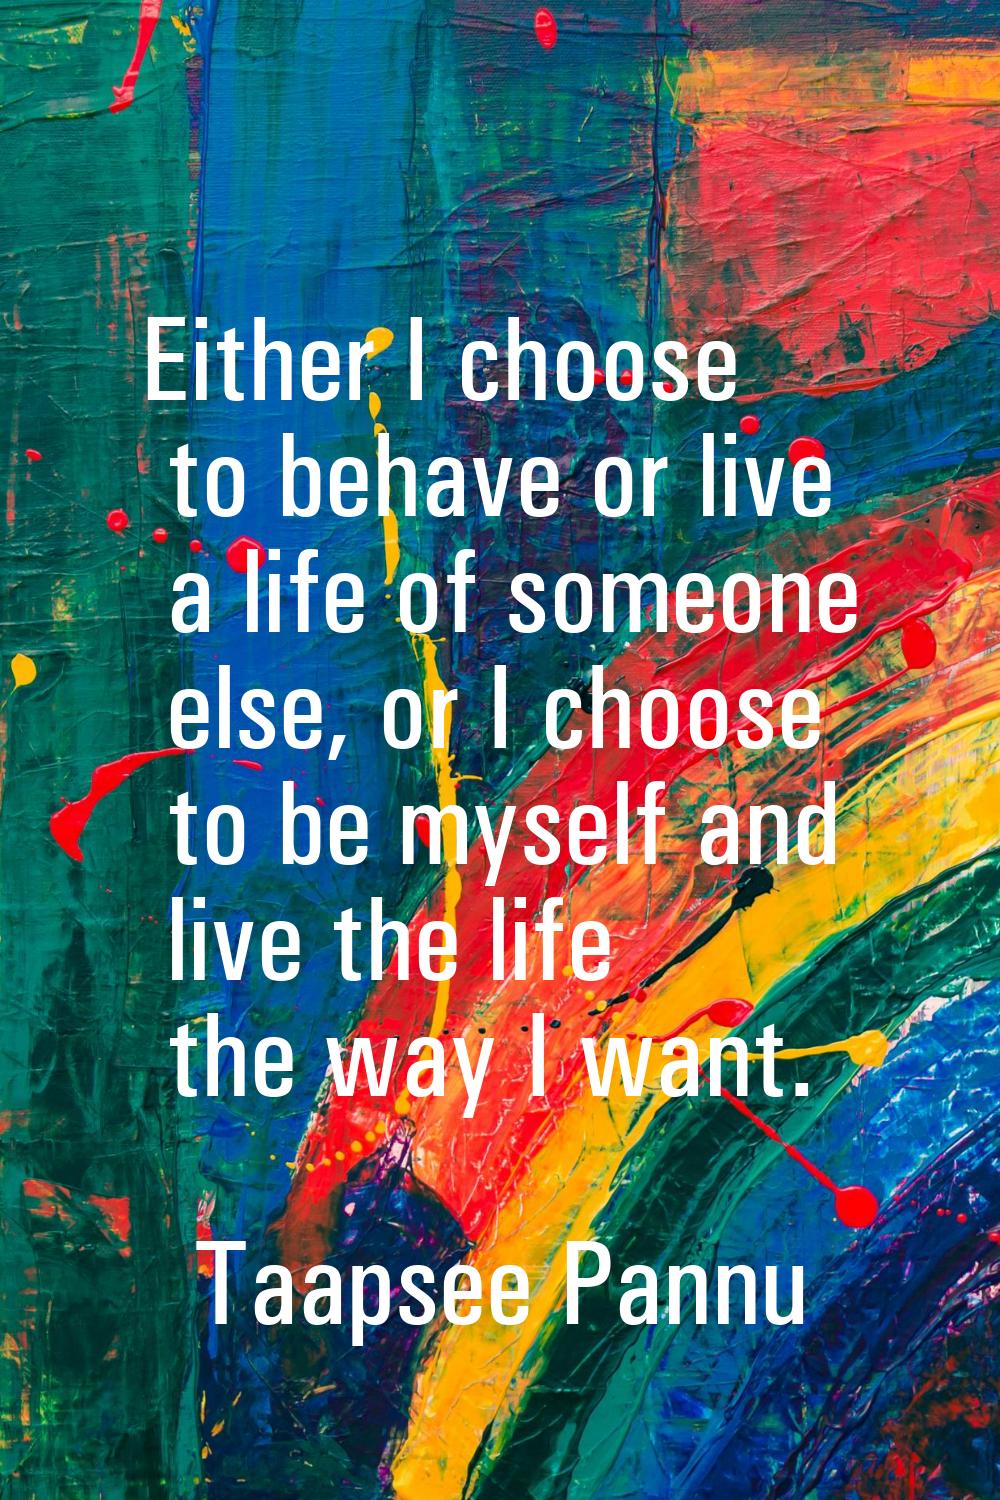 Either I choose to behave or live a life of someone else, or I choose to be myself and live the lif